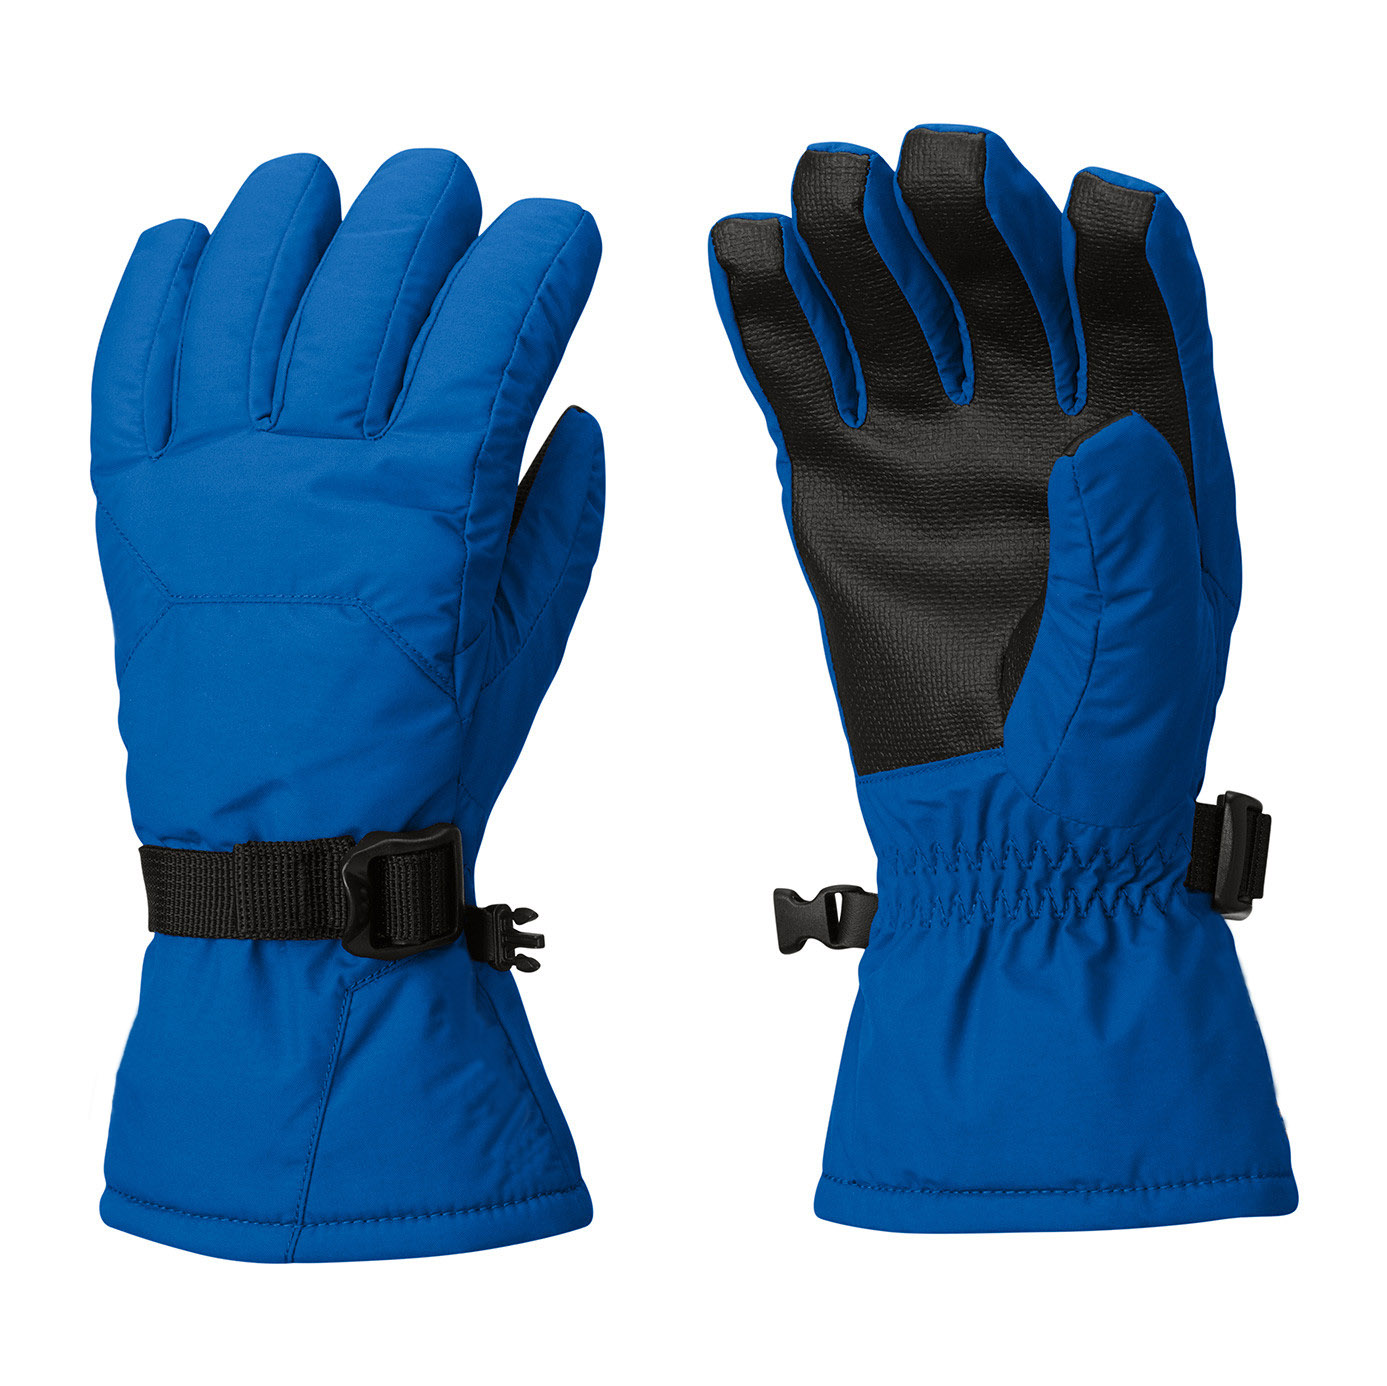 High quality winter ski gloves thinsulate Thermal Reflective Warmth breathable ski gloves